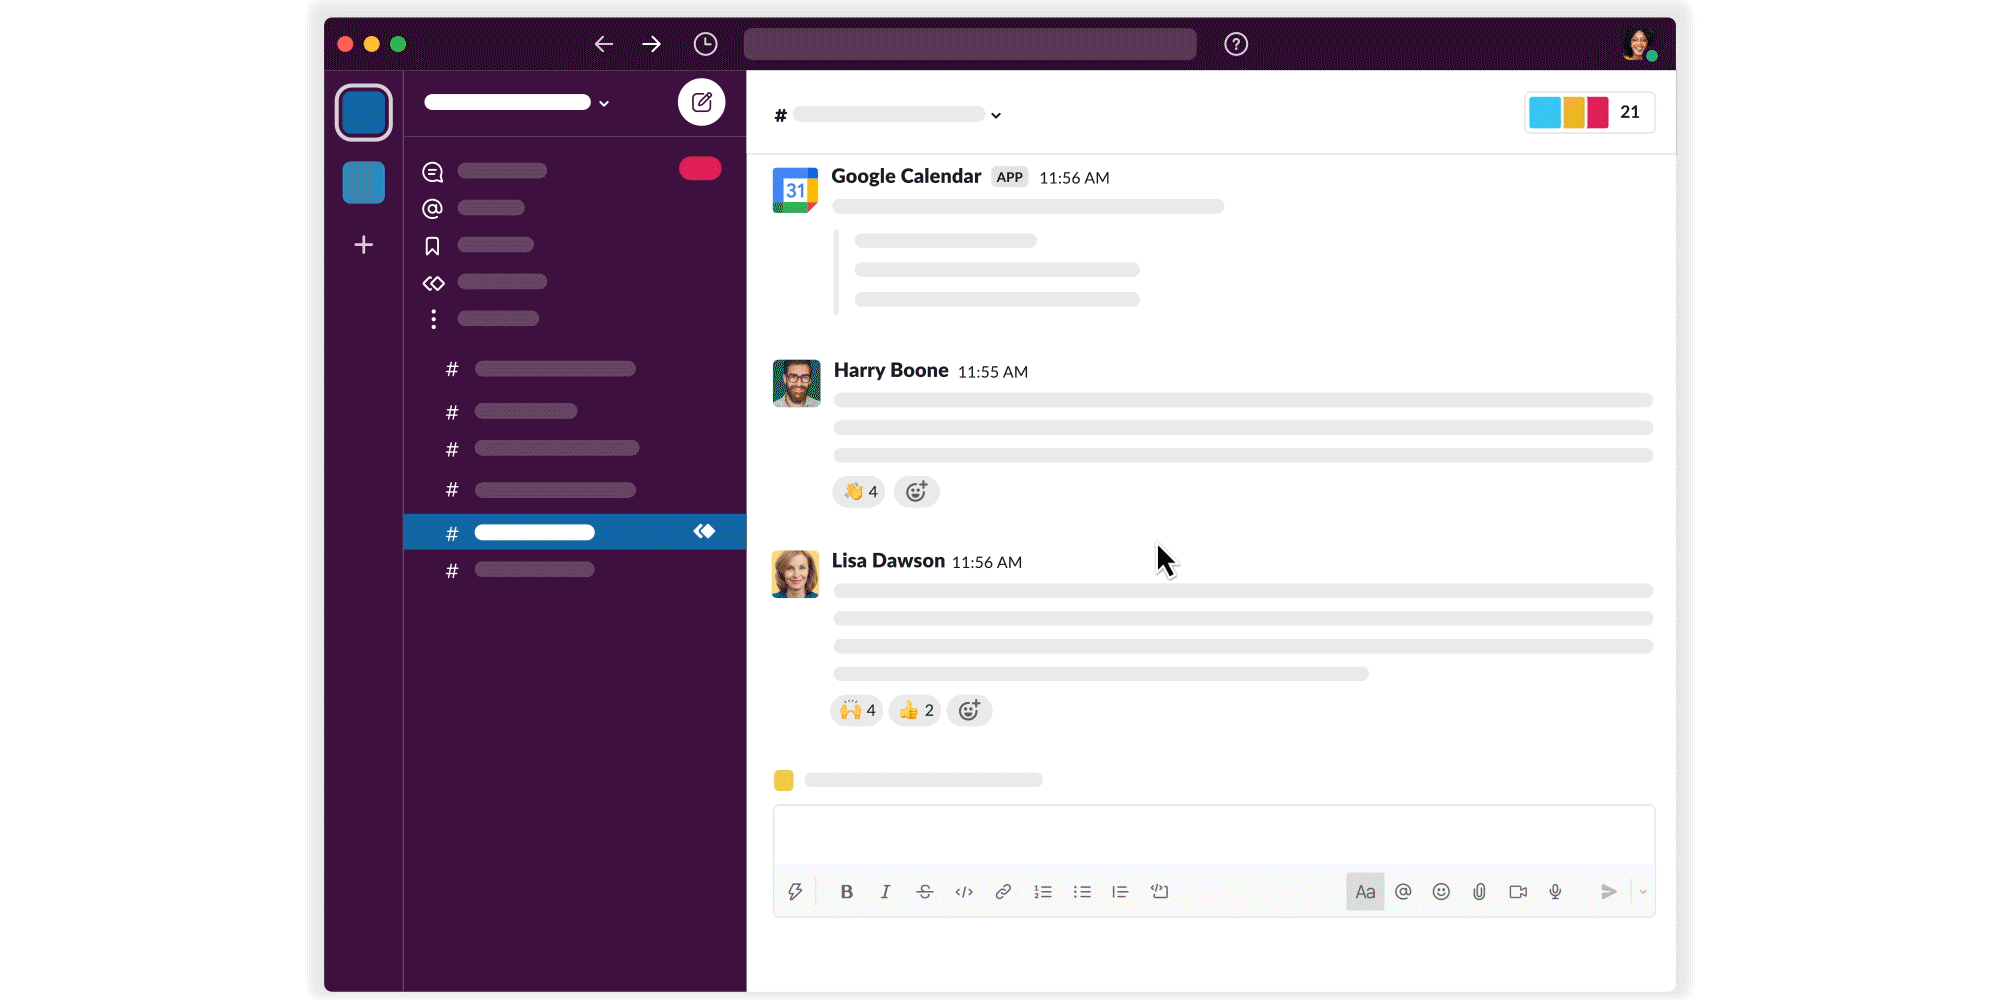 Animated GIF of a video clip in Slack with someone sharing their screen to show work on another website to their team